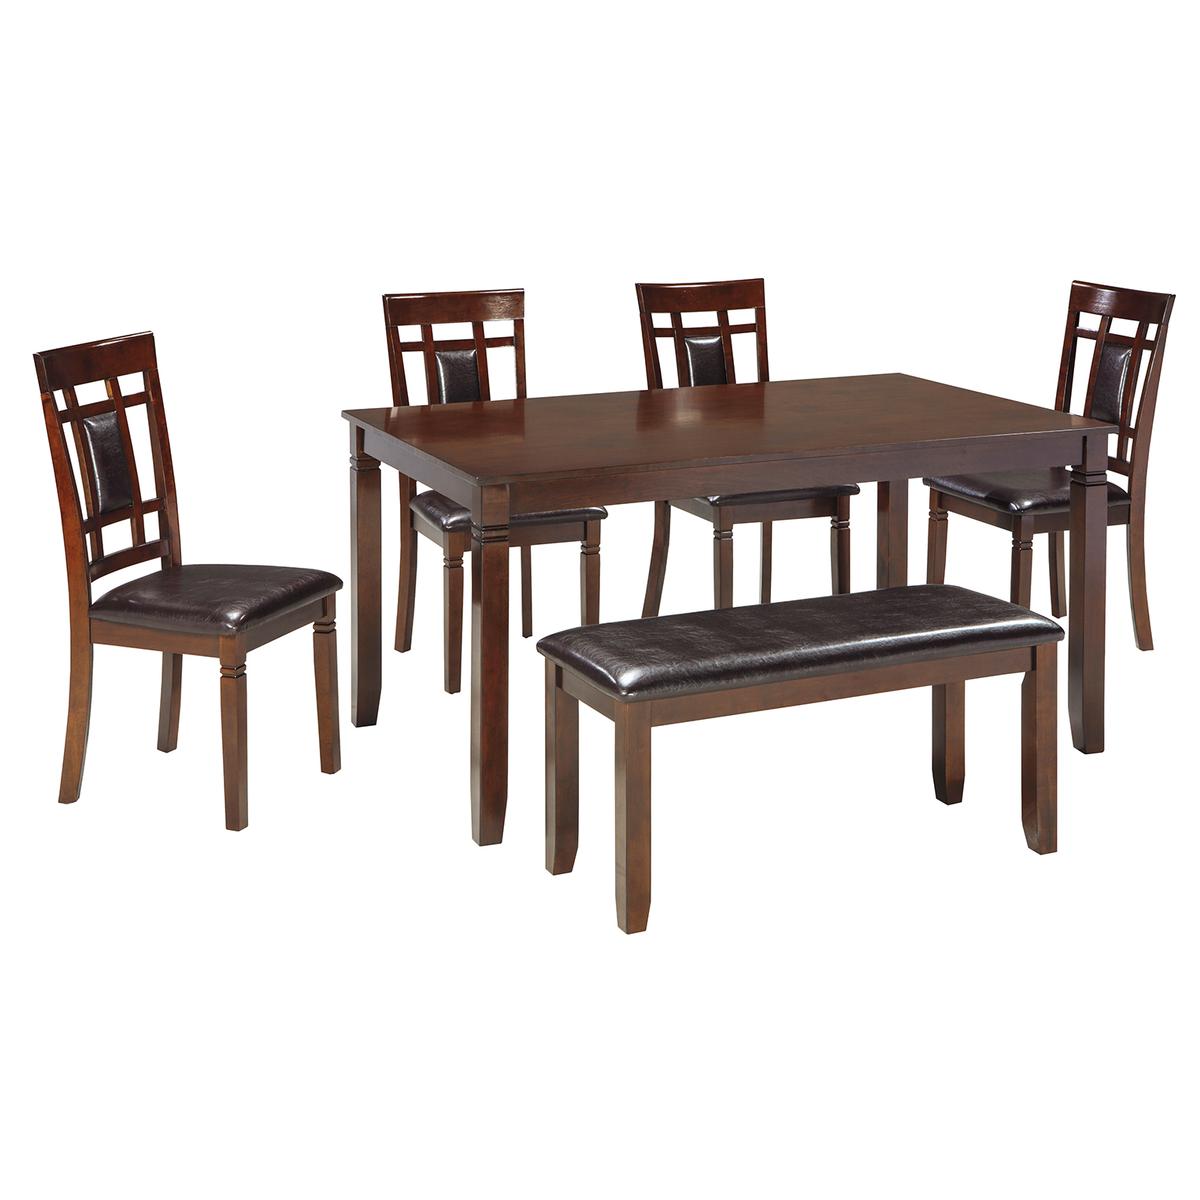 Ashley Bennox Dining Table w/ 4 Chairs & Bench (6 Piece Set)